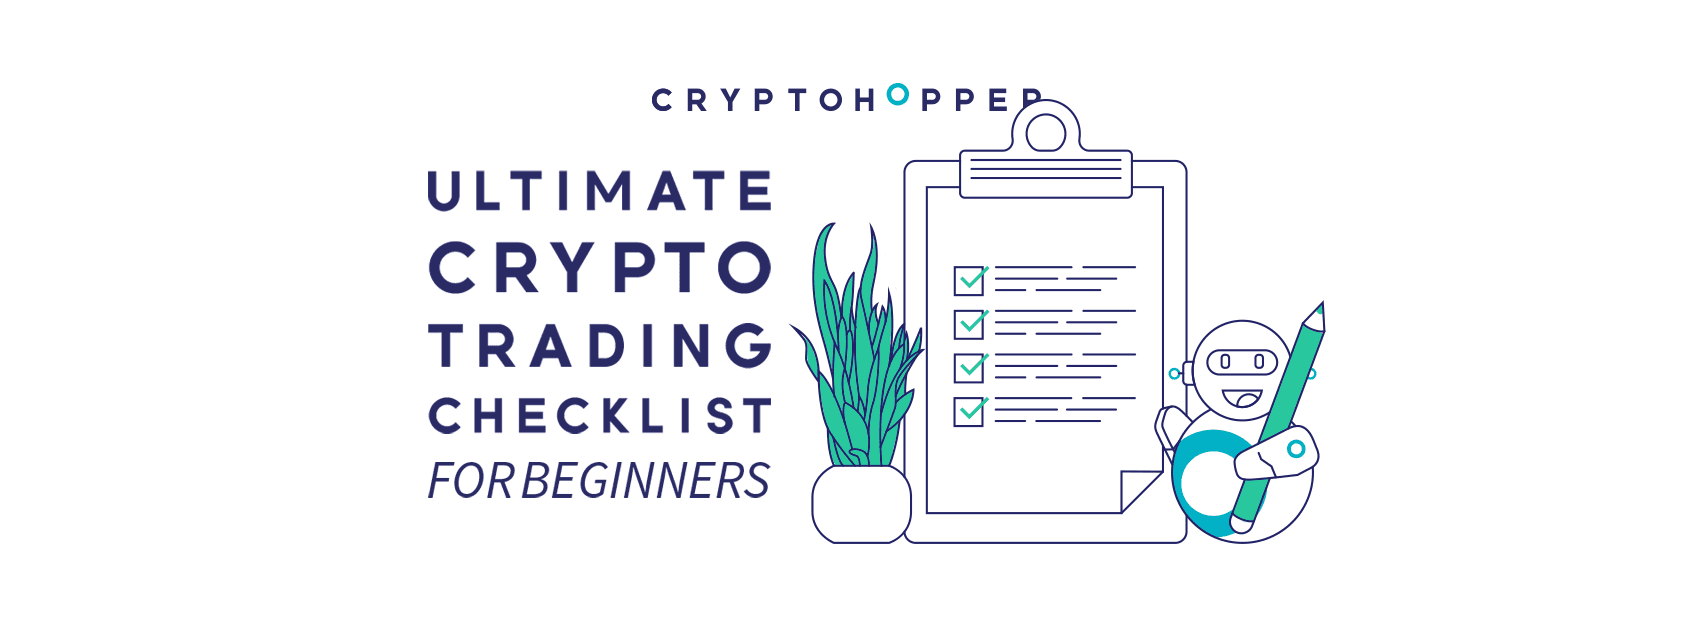 The Ultimate Crypto Trading Checklist for Beginners 2019